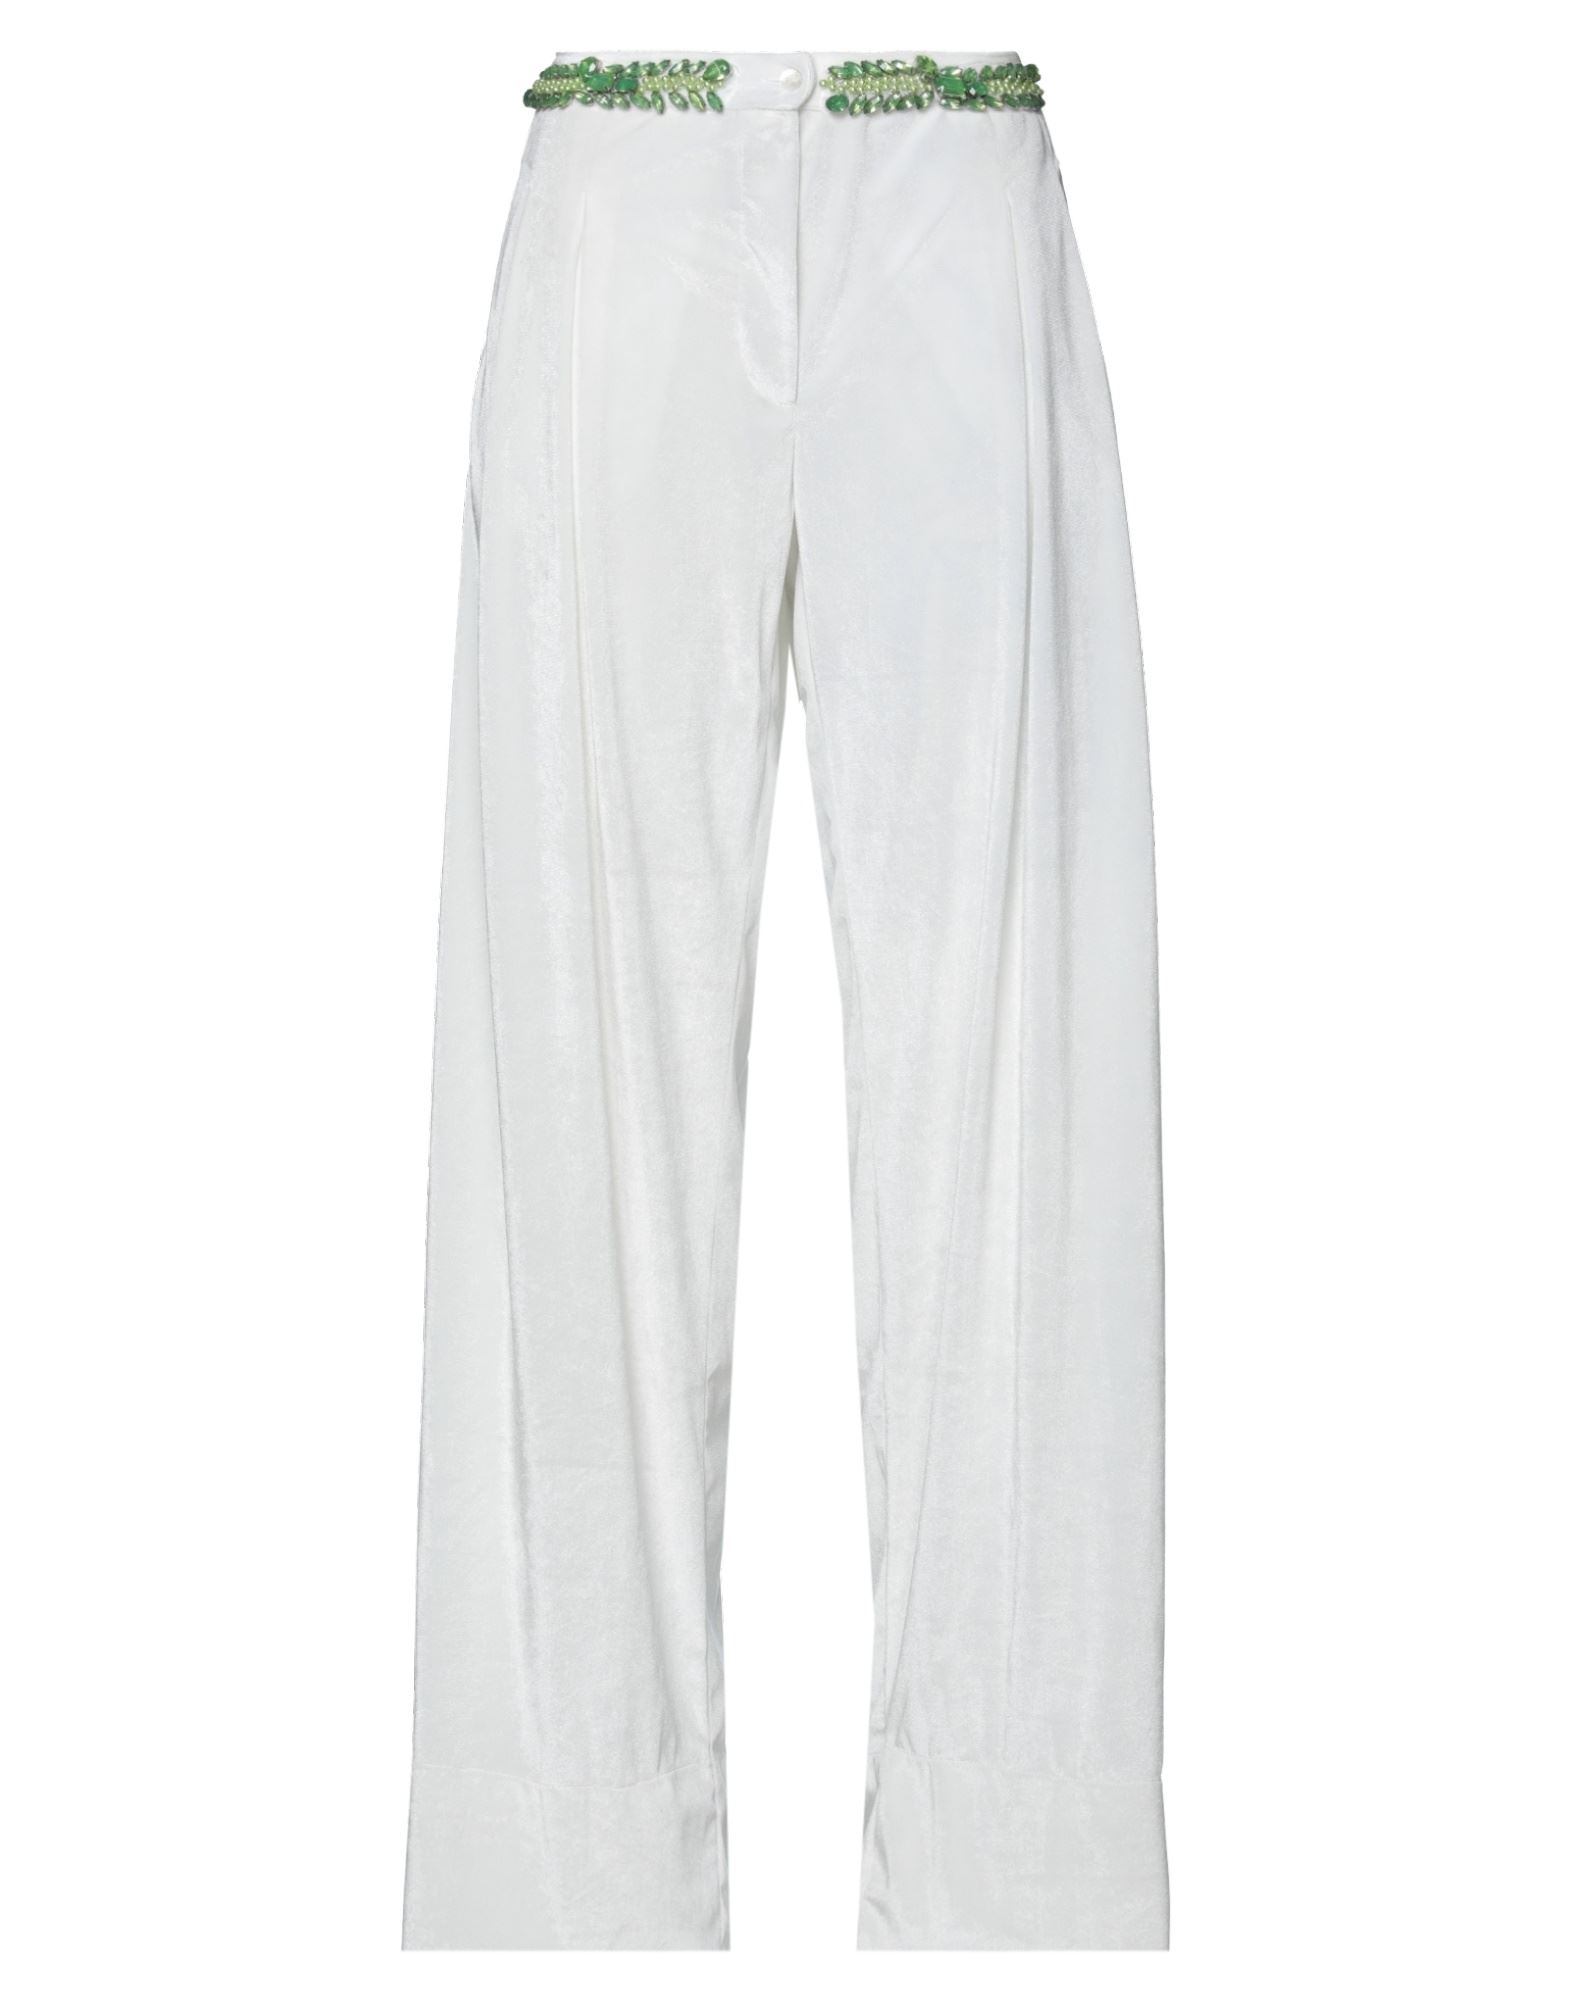 Connor & Blake Pants In White